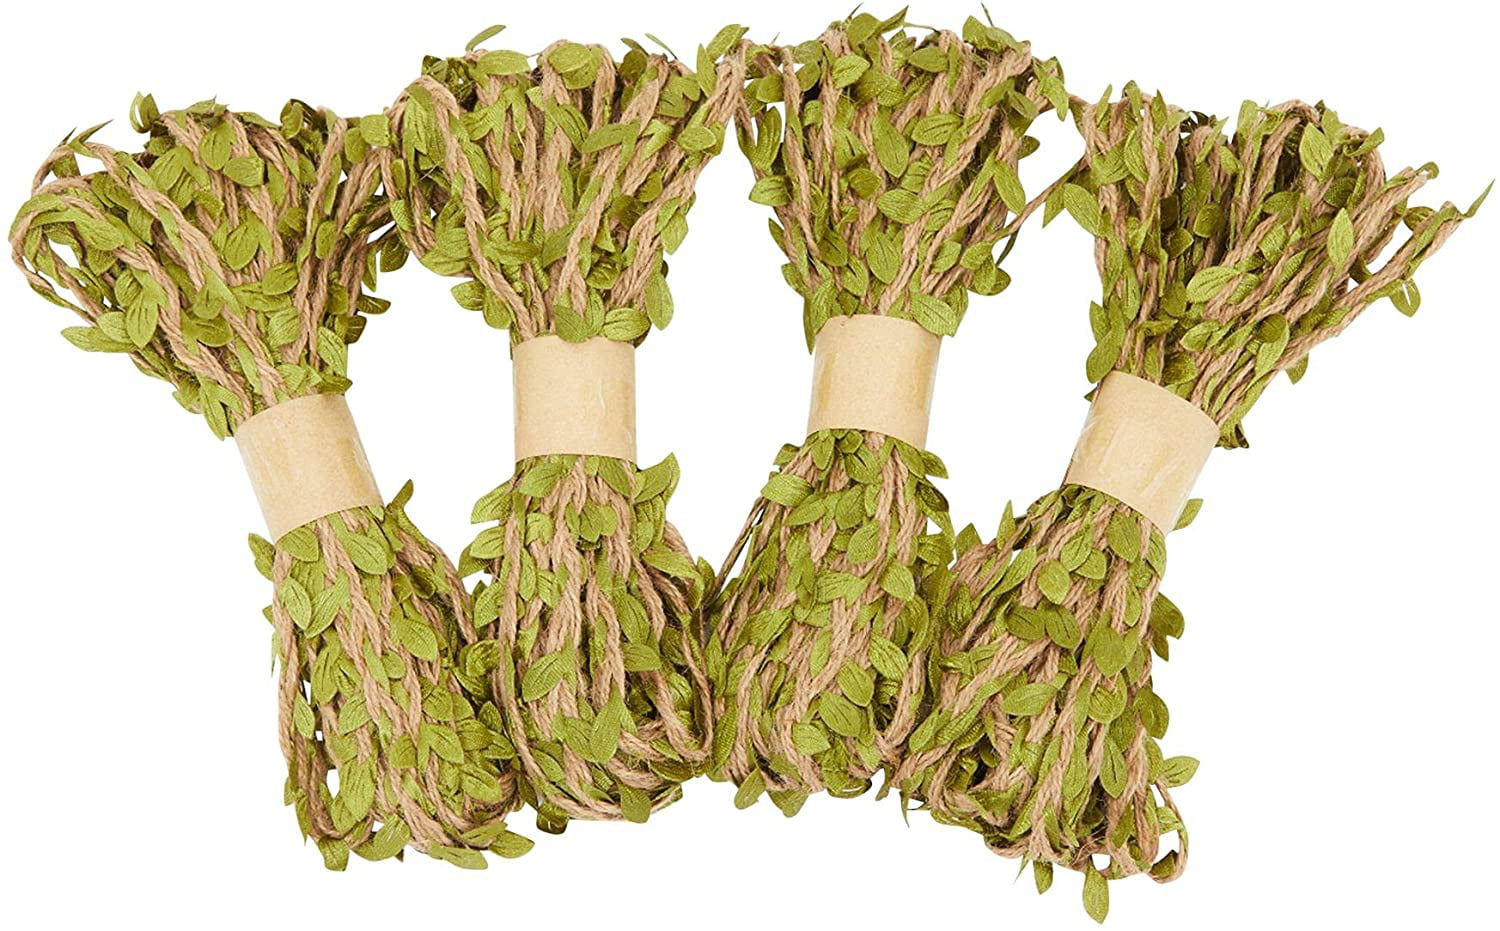 Home Leaf Garland Headband 4-Roll Wall Hanging Artificial Burlap Vine Plants Greenery Vine Rope for Wreath 10M or 32.8 Feet Each Vine Ribbon Jungle Garden Party Decorations Wedding